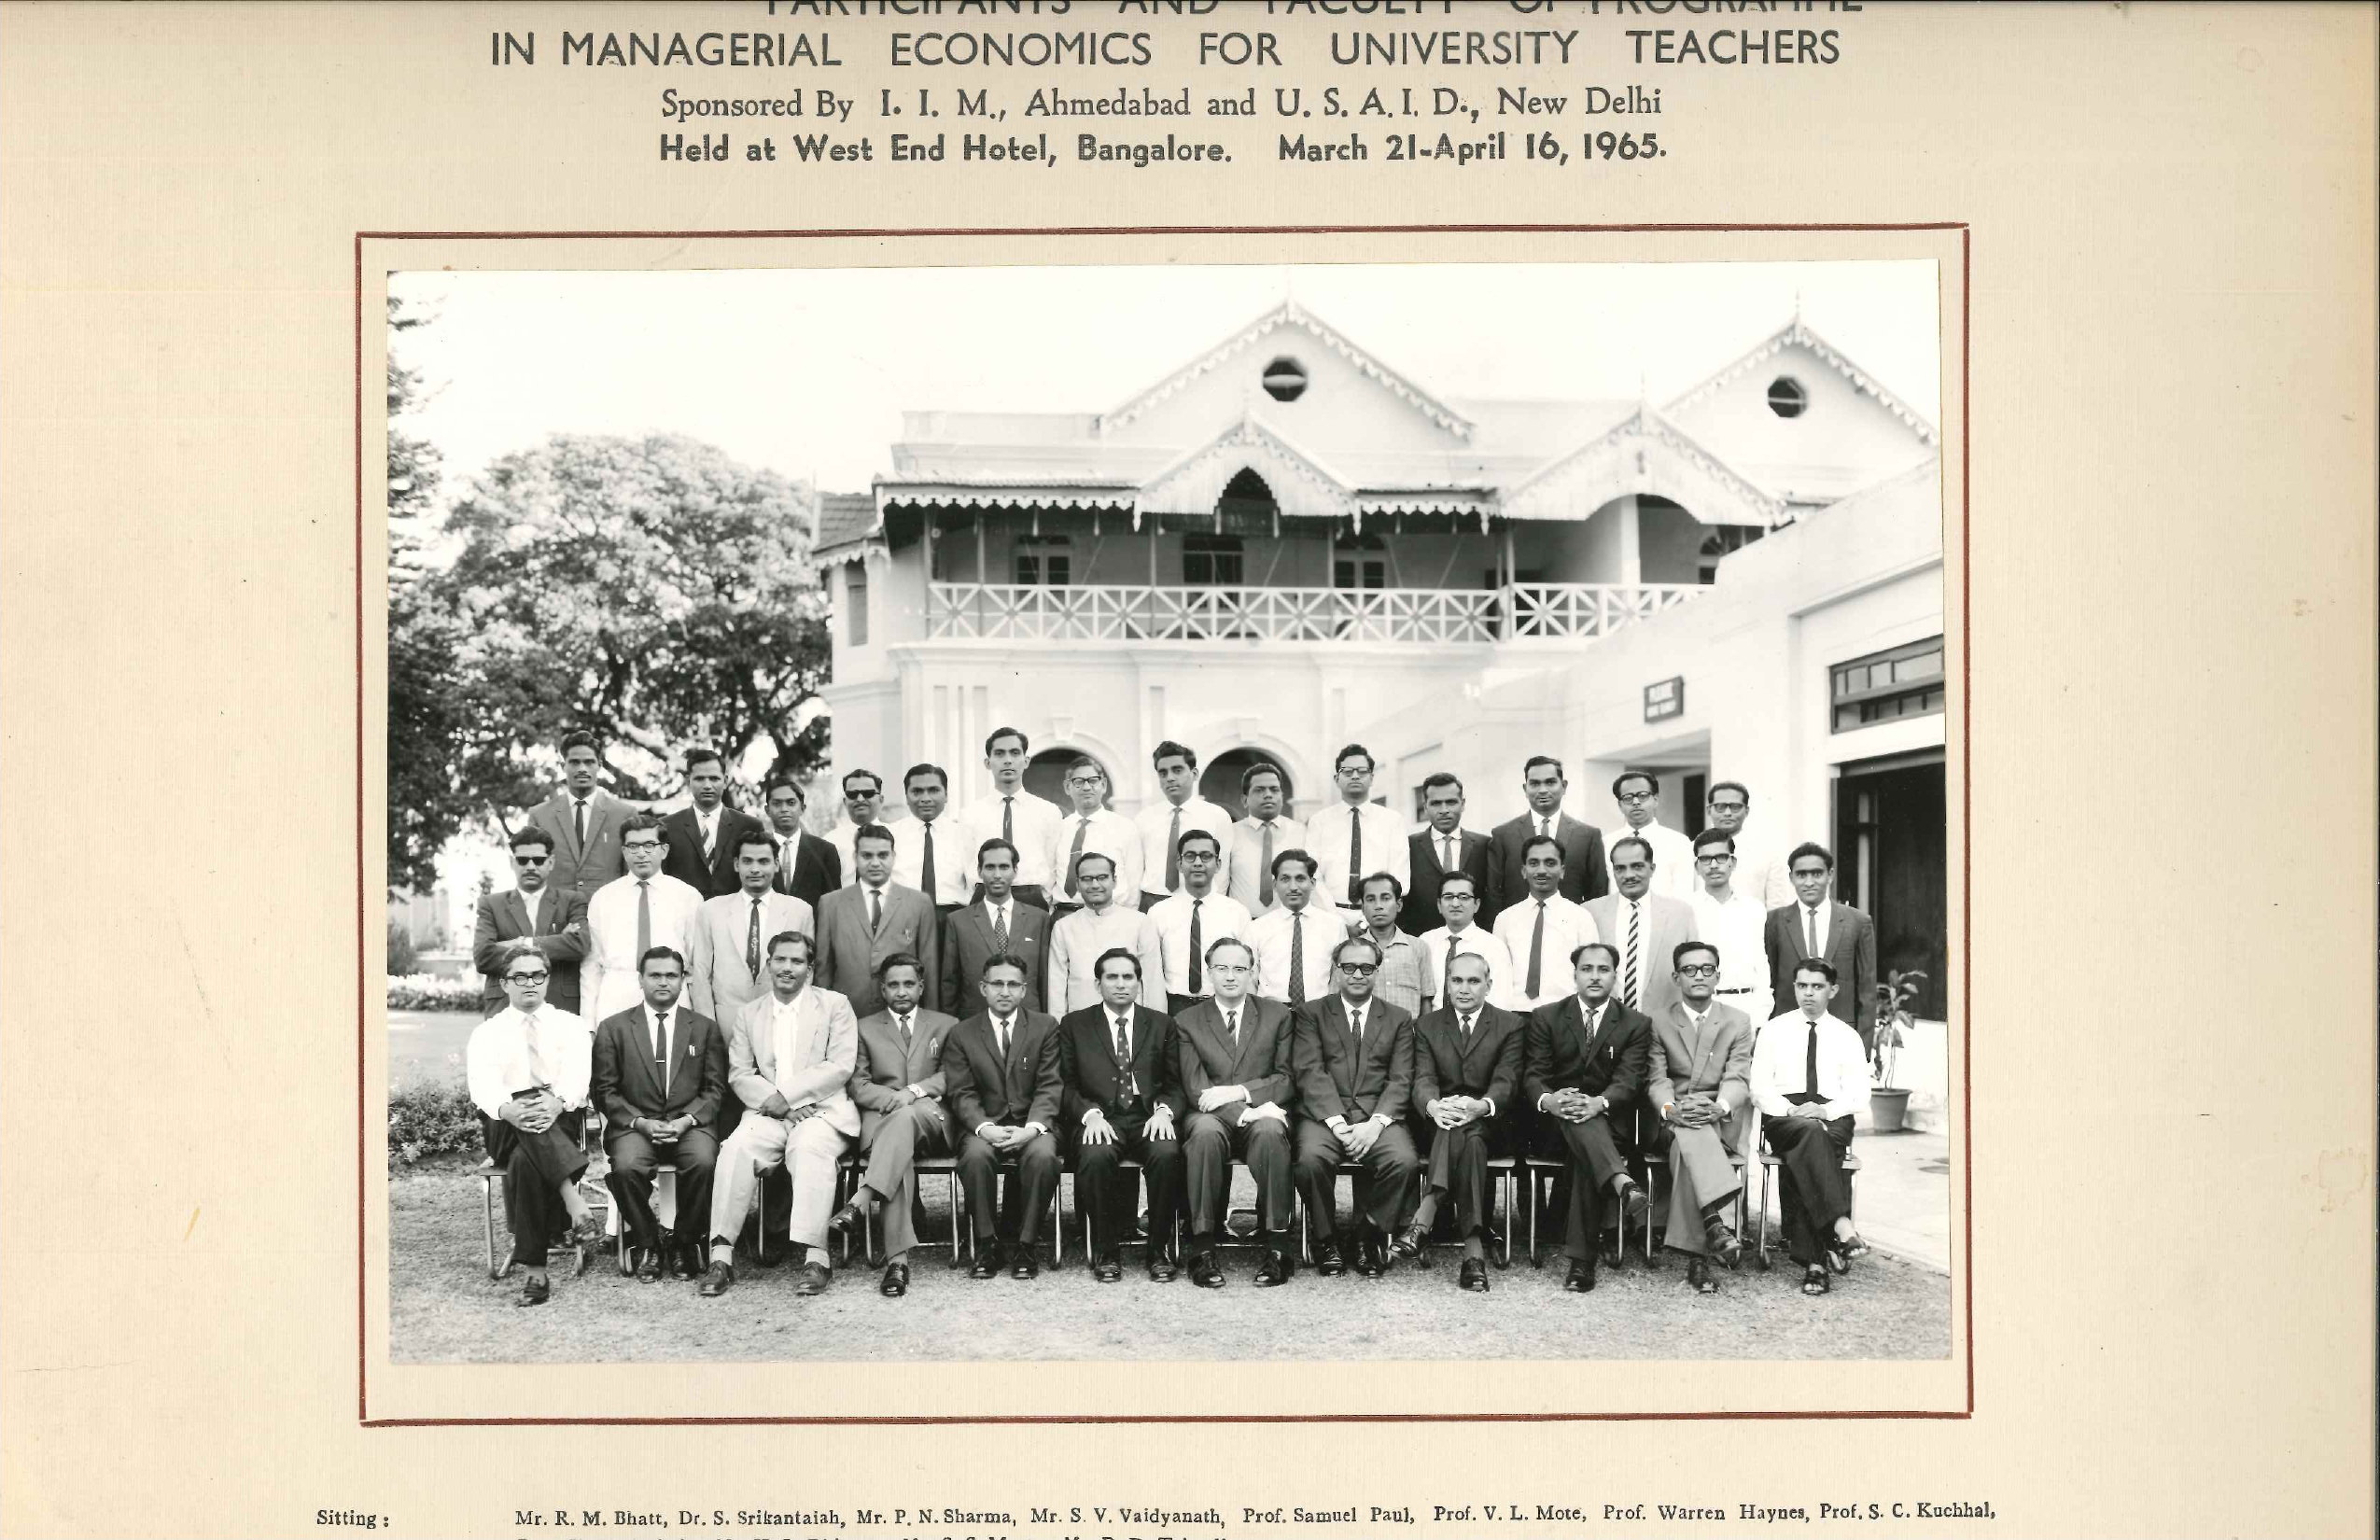 Early Management & Faculty Development Programmes_1964_1